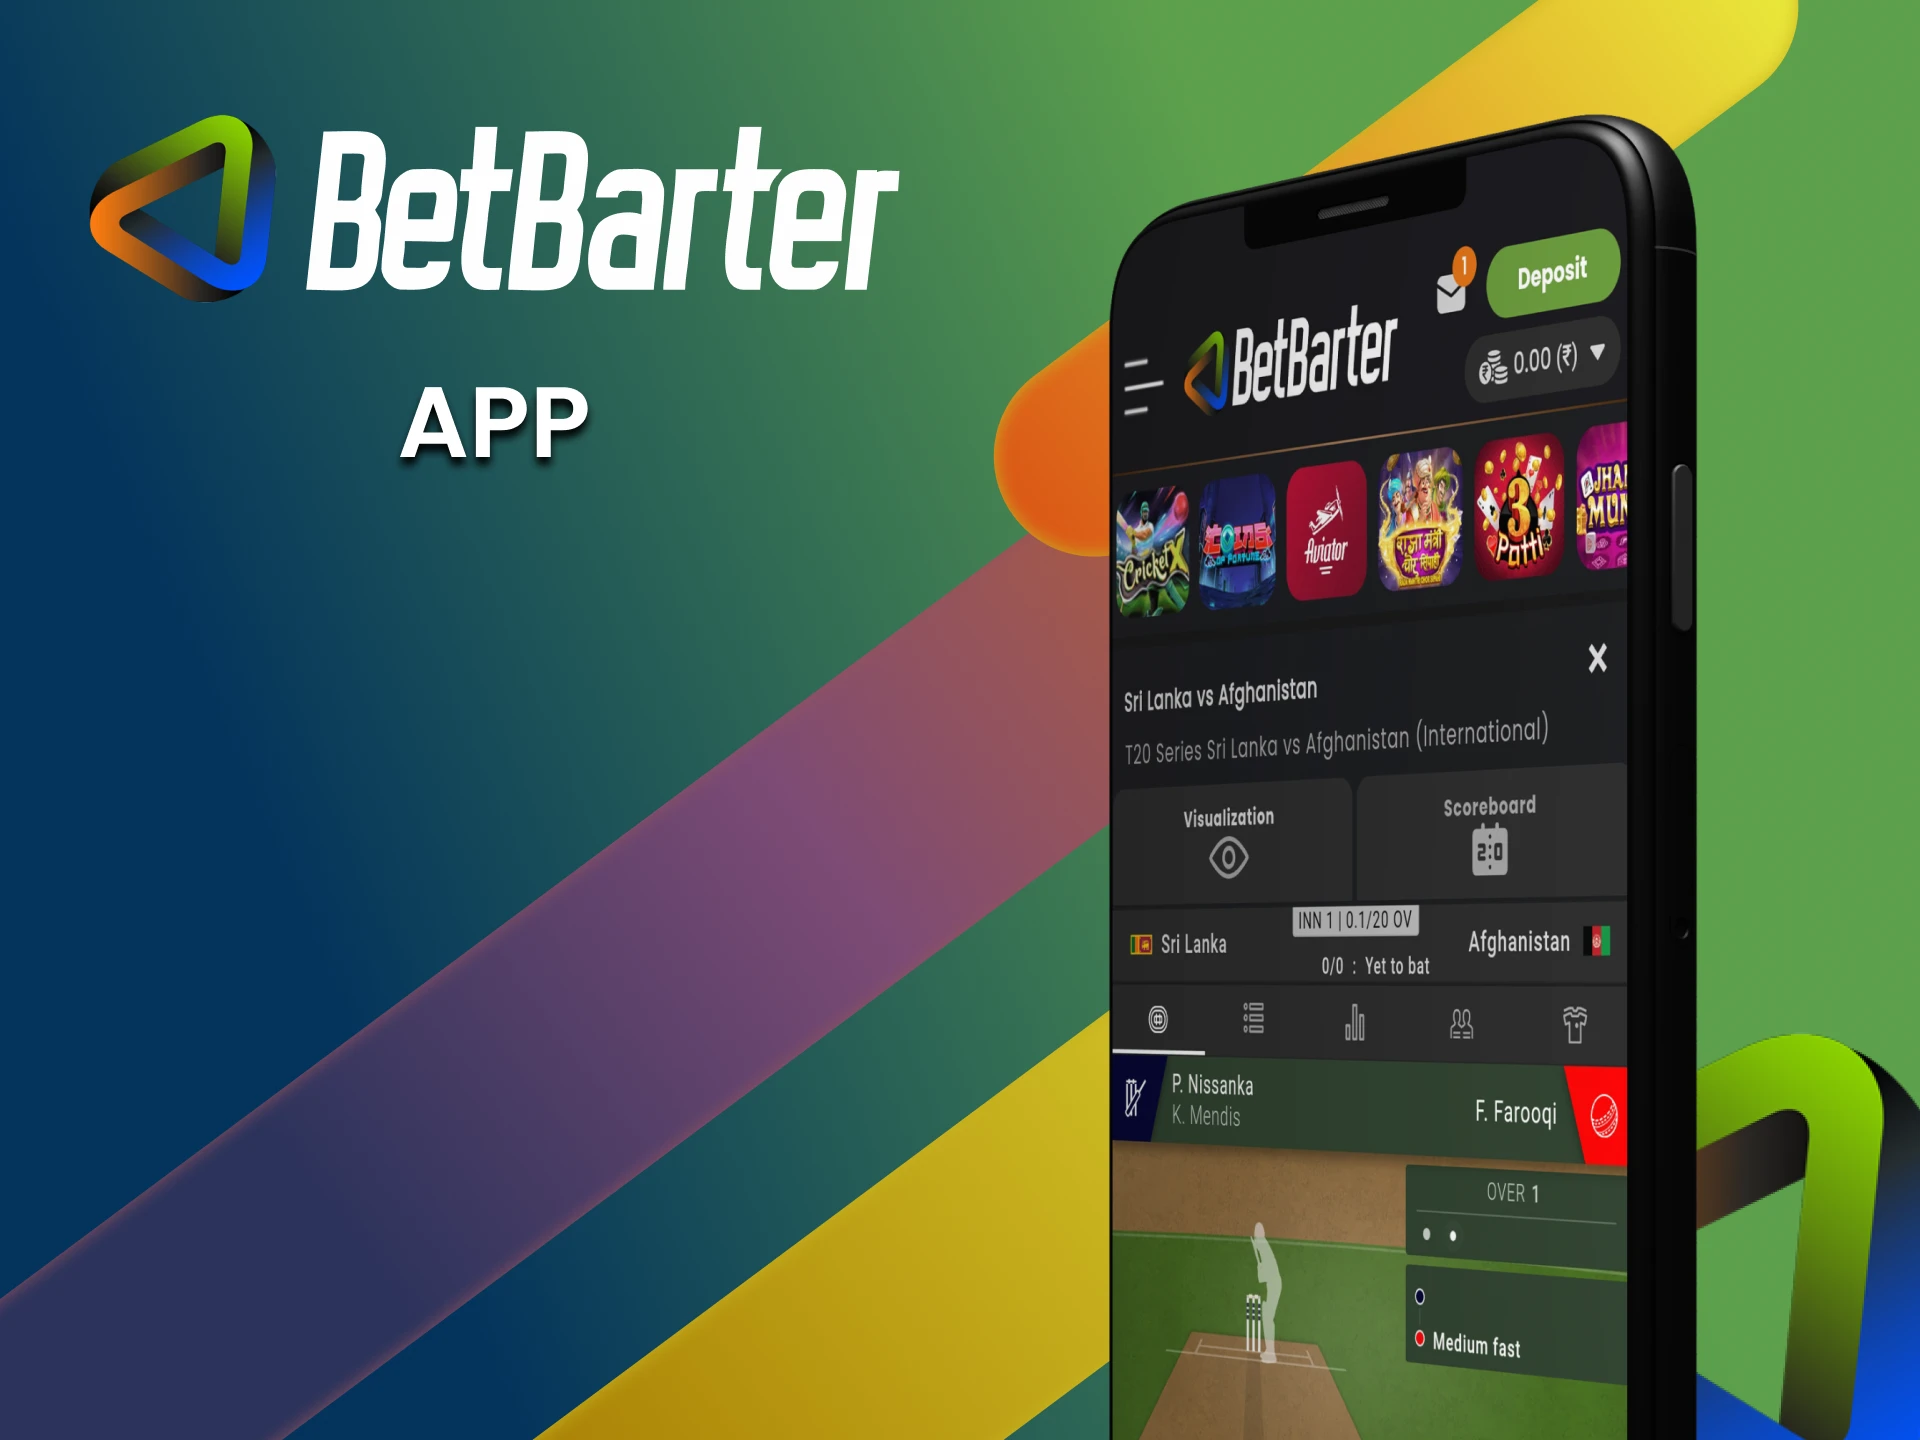 Bet on cricket using the BetBarter app.